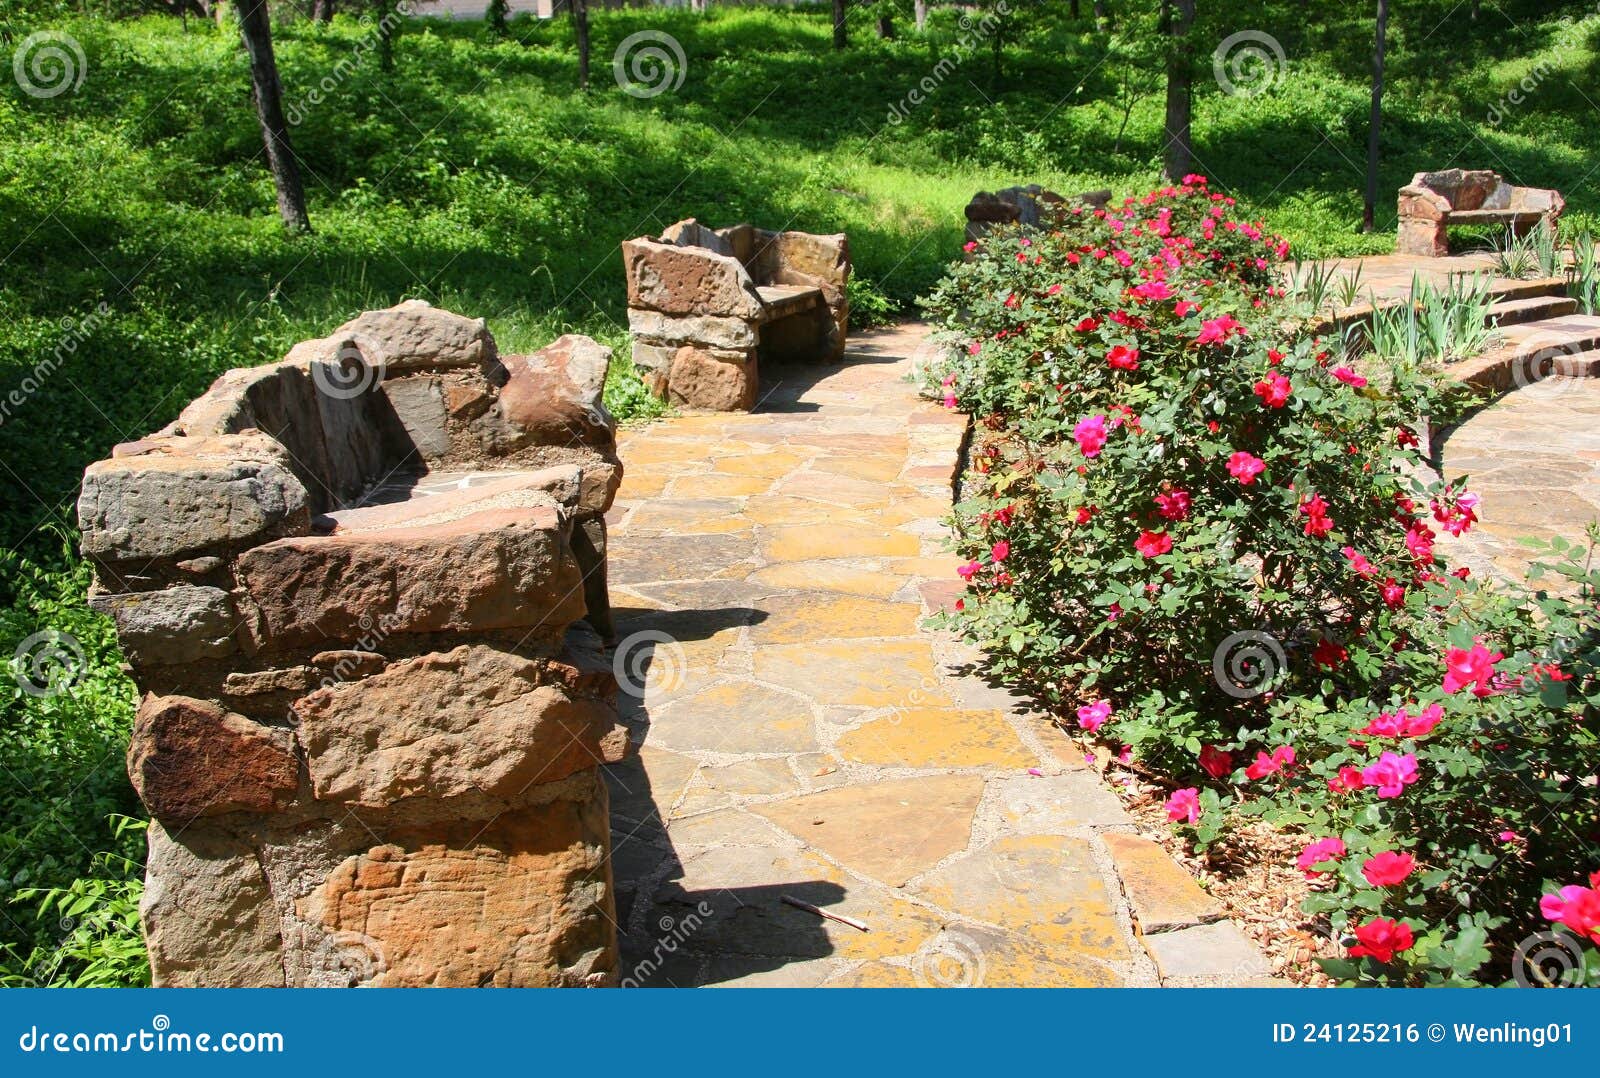 Stone Benches In The Garden Royalty Free Stock Image - Image: 24125216